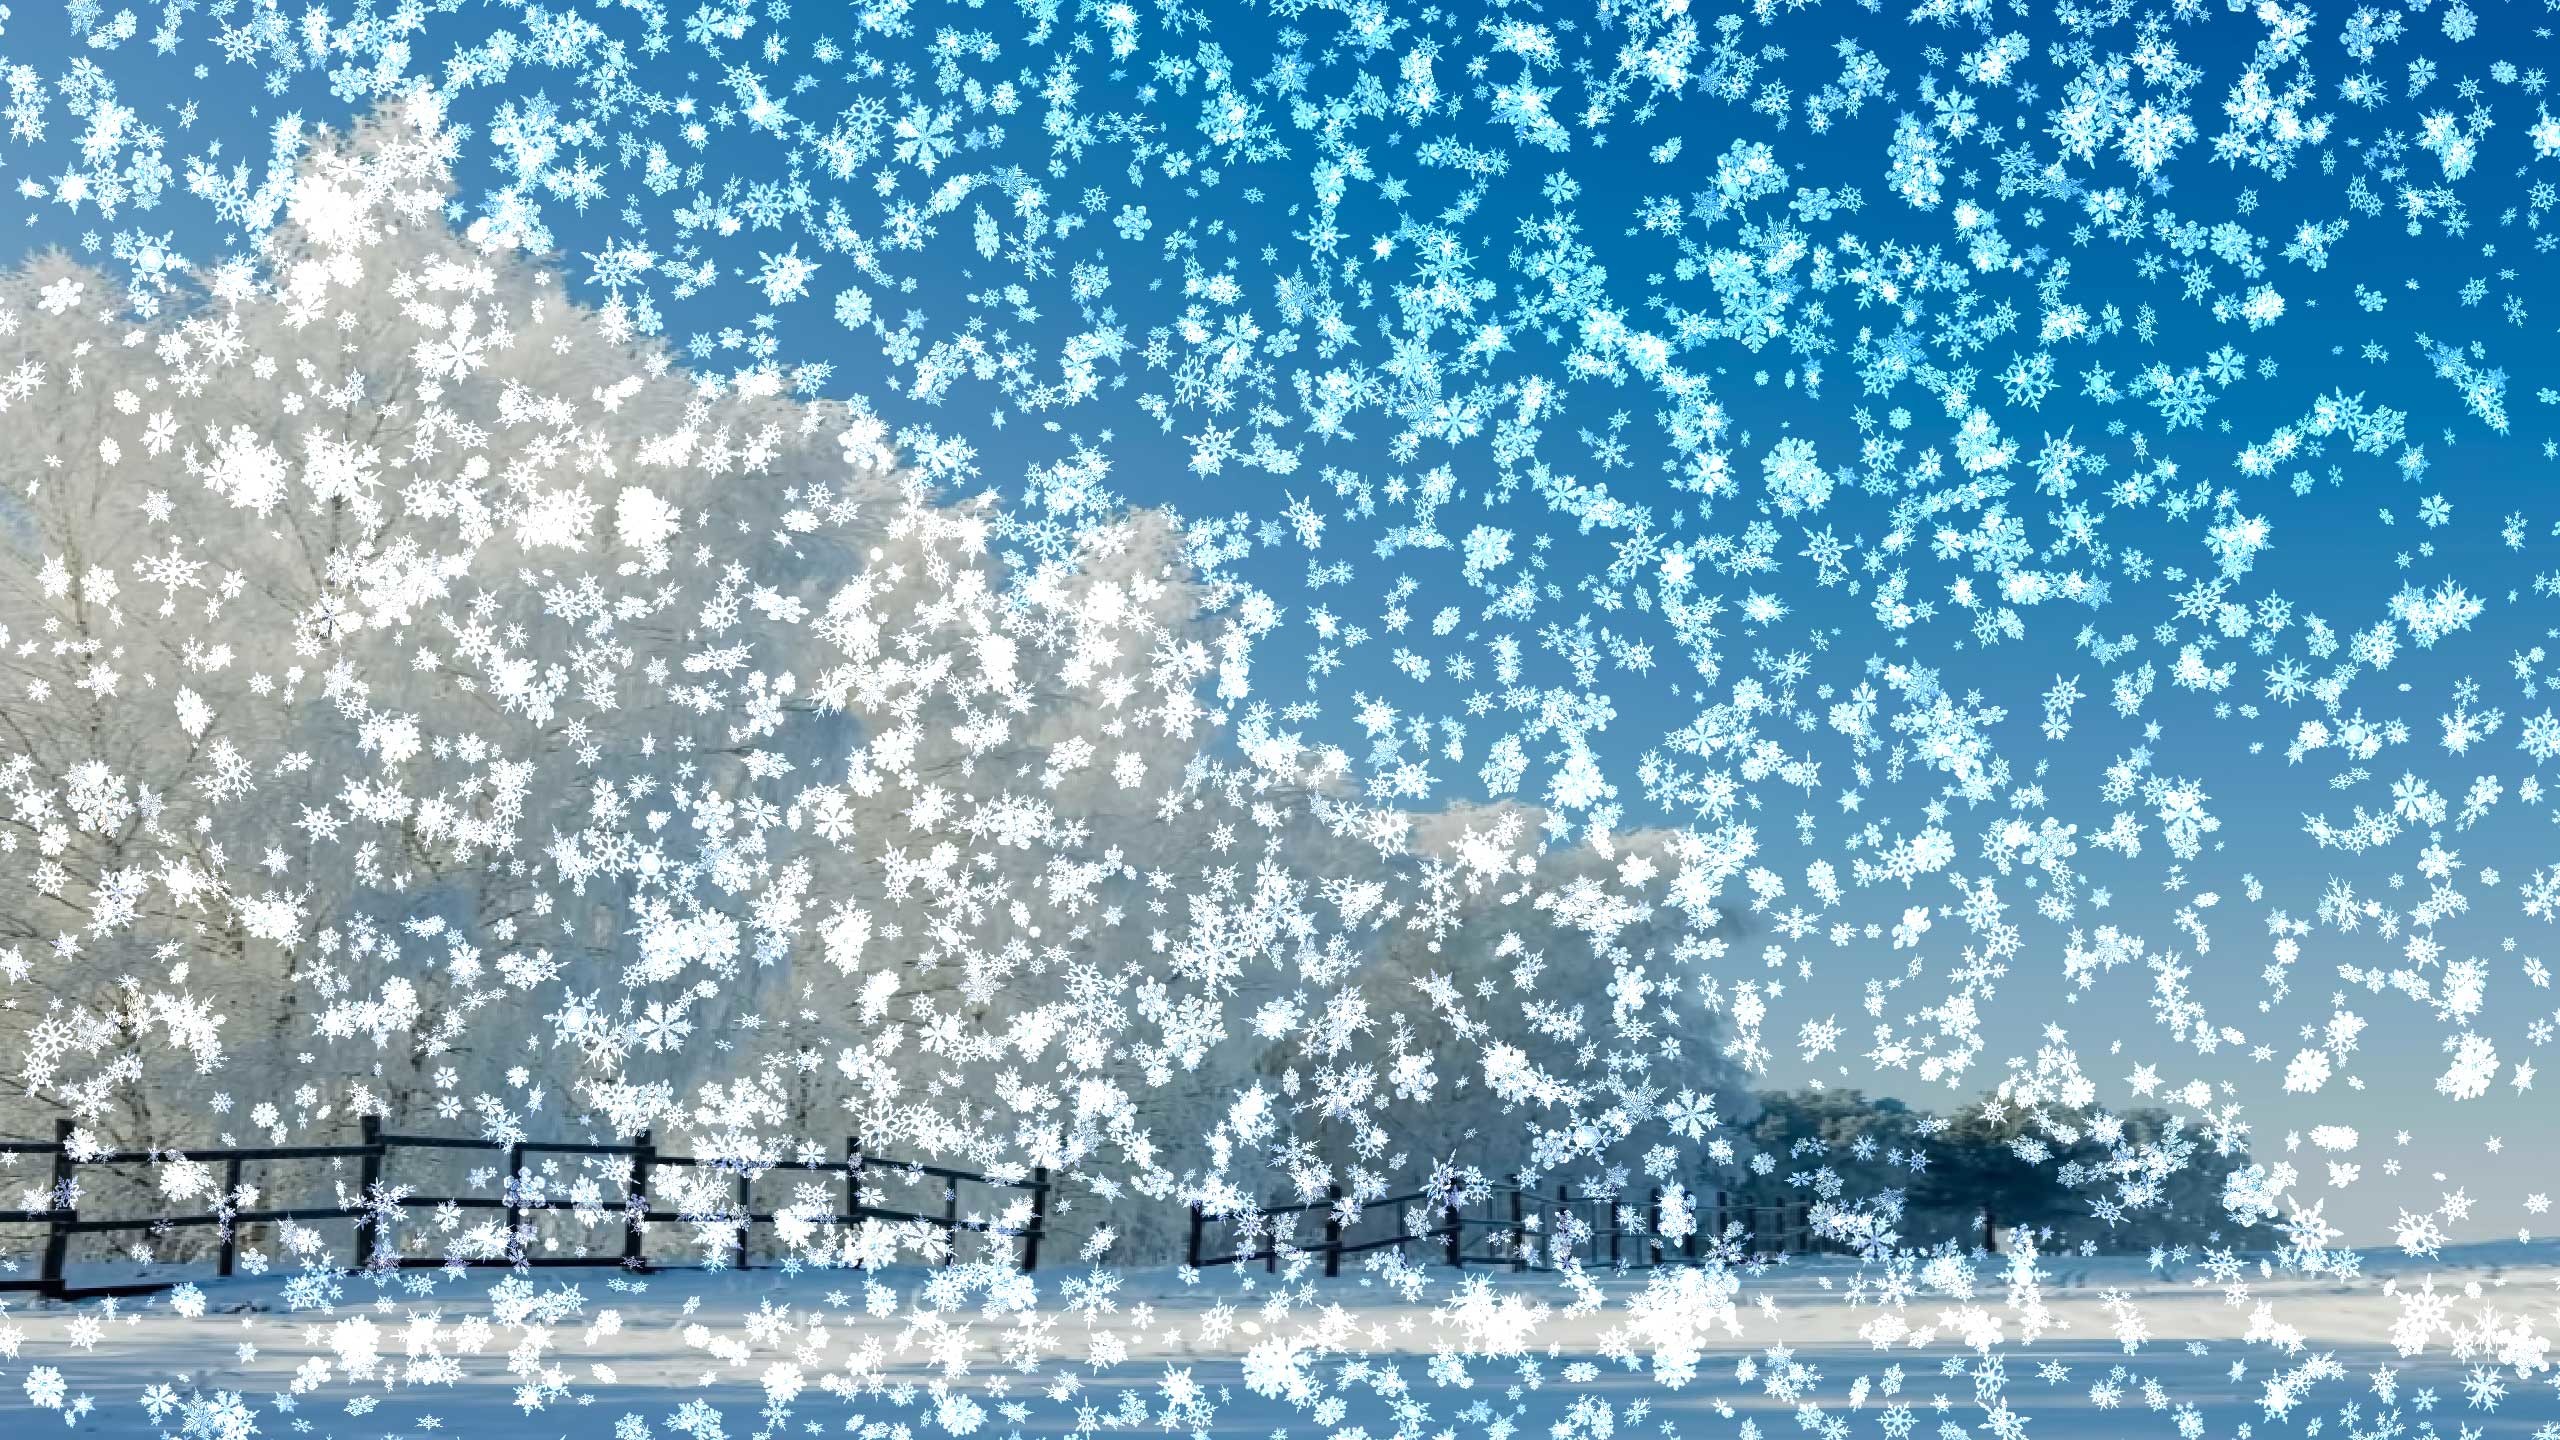 Animated Snow Falling Wallpaper (60+ images)